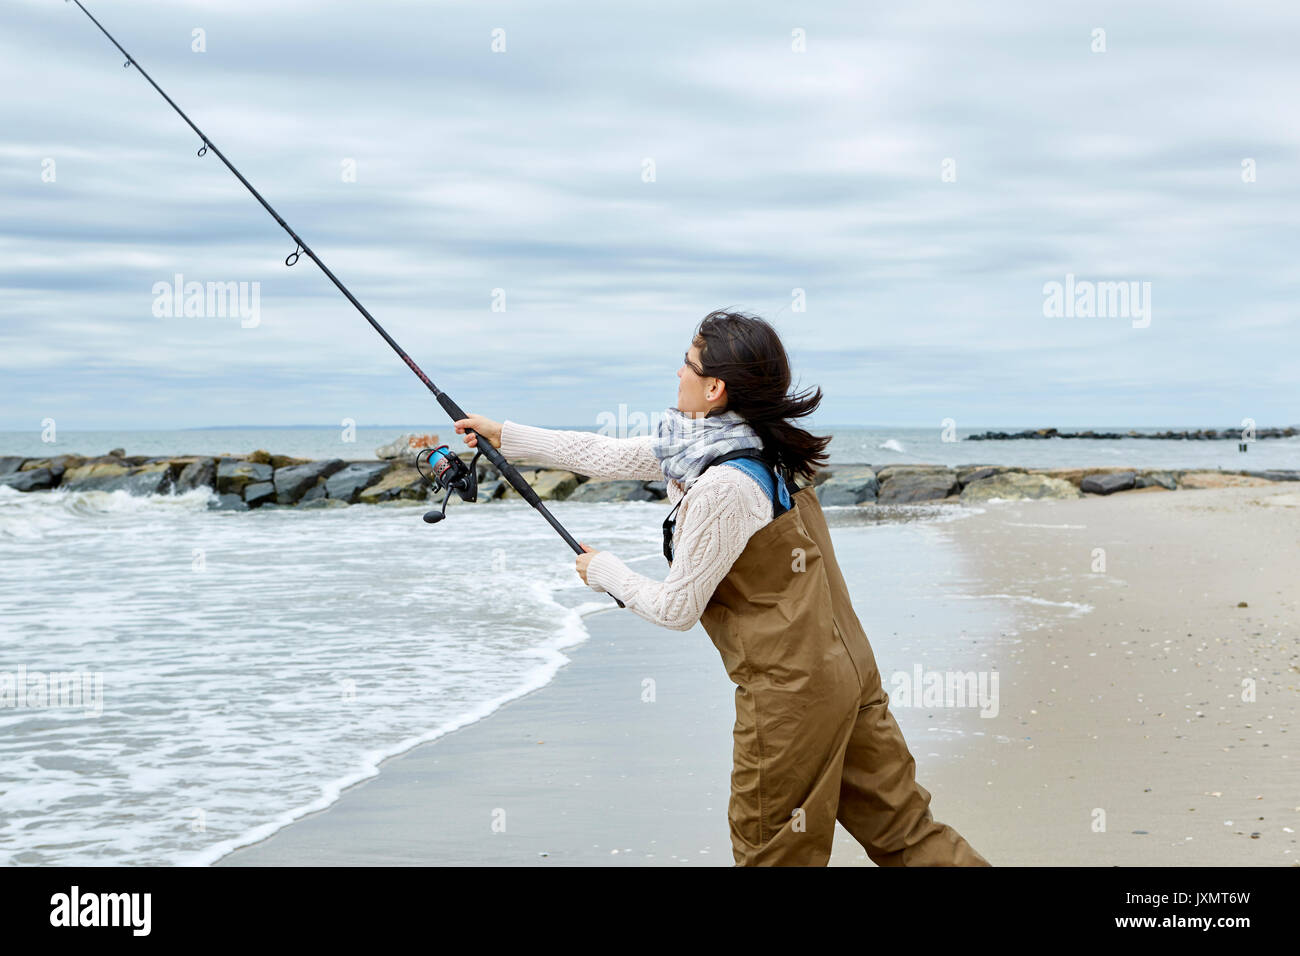 Young woman in waders casting sea fishing rod from beach Stock Photo